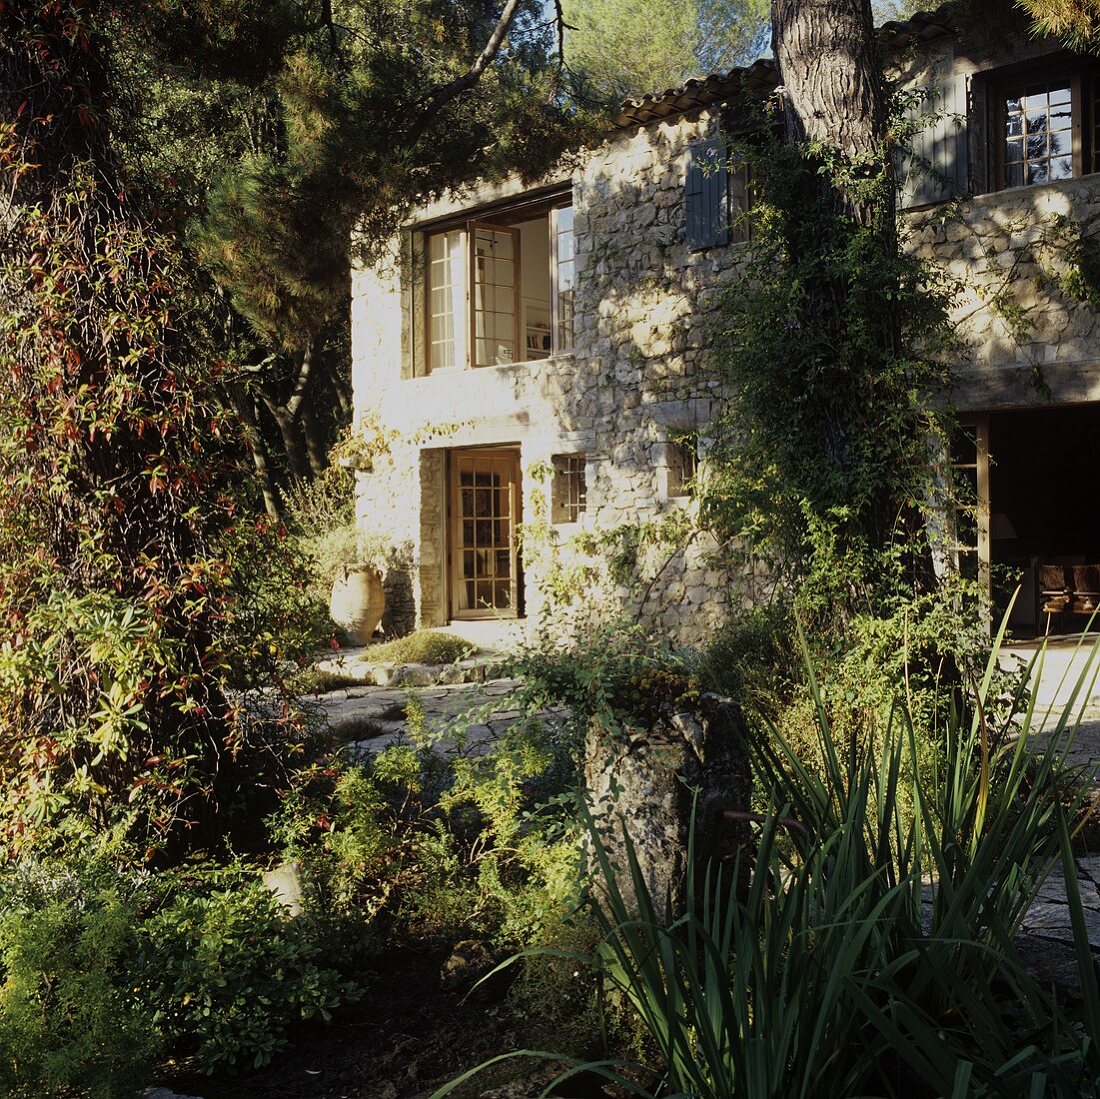 A Mediterranean country house with a natural stone facade, wooden transom windows and an overgrown garden